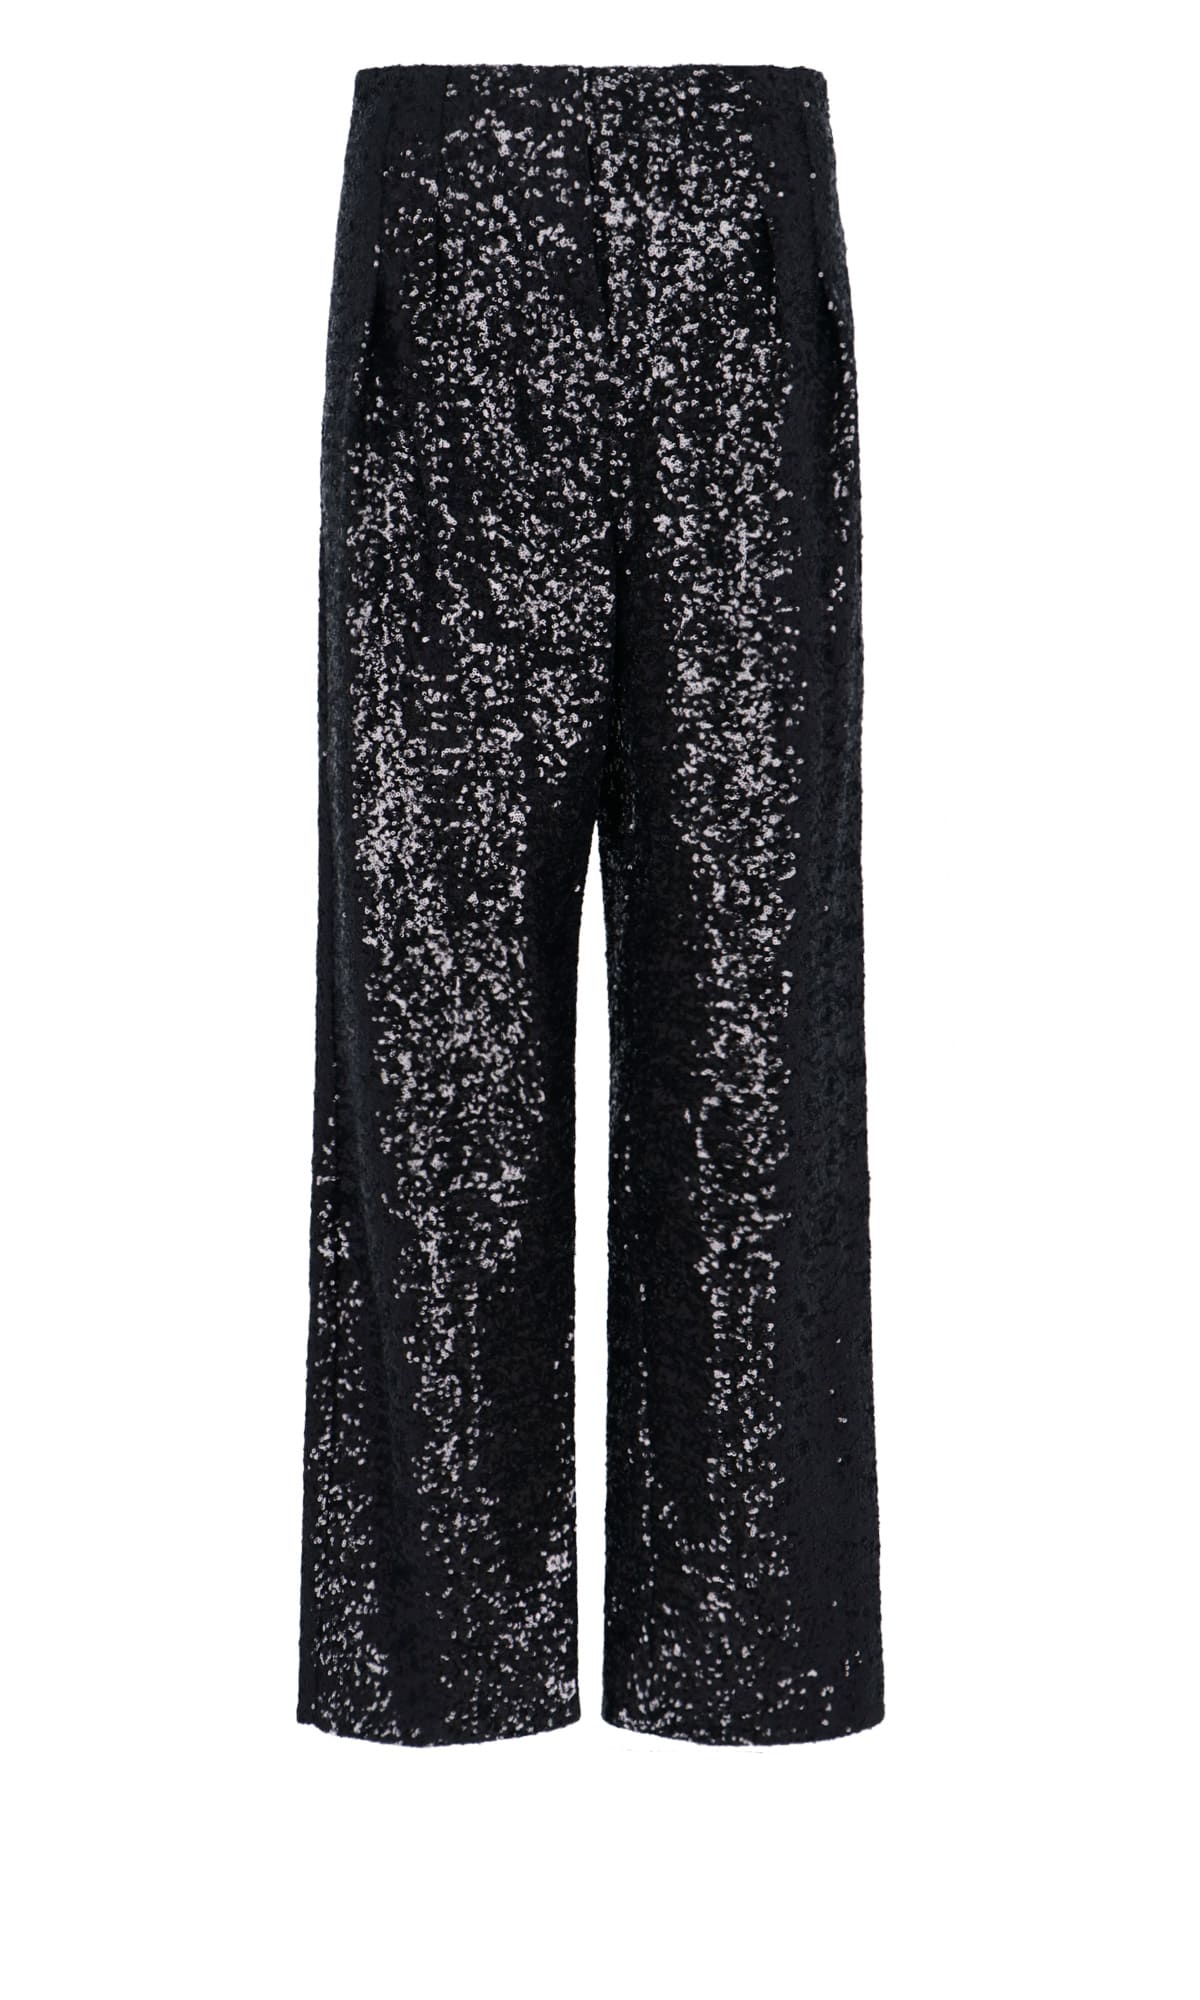 In The Mood For Love Pants